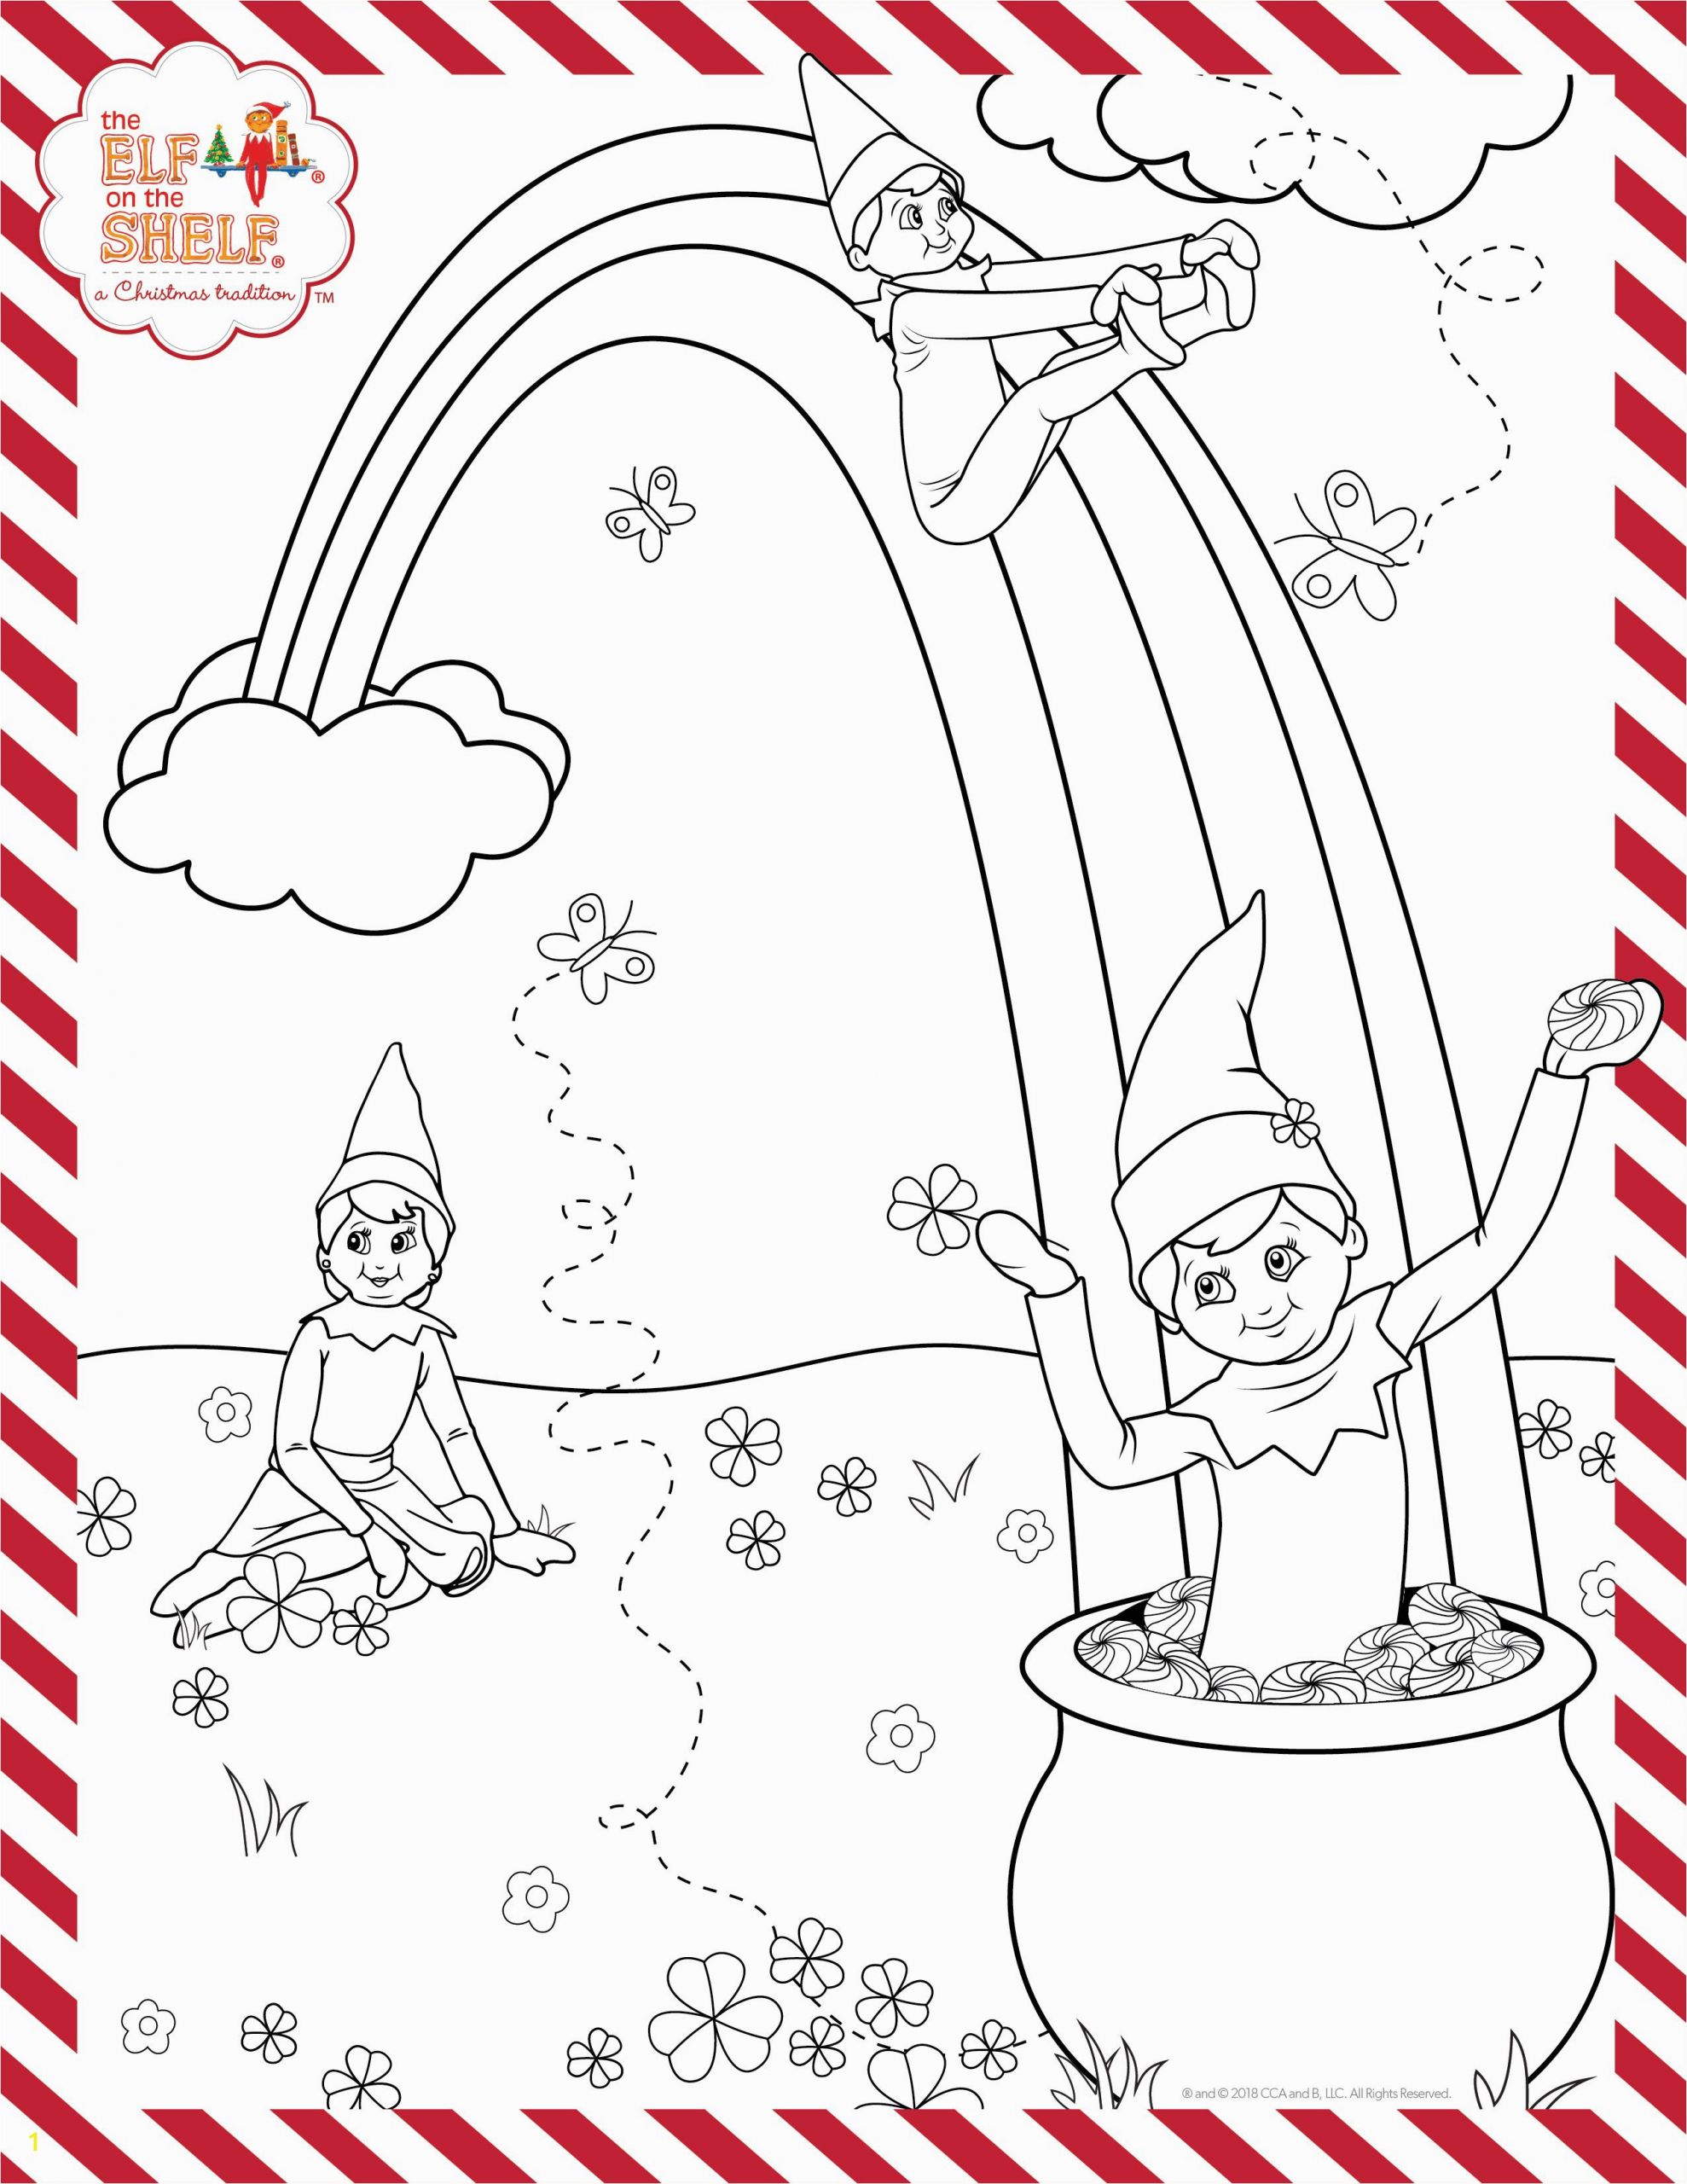 Free Printable Elf On the Shelf Coloring Pages St Patrick S Day Printable